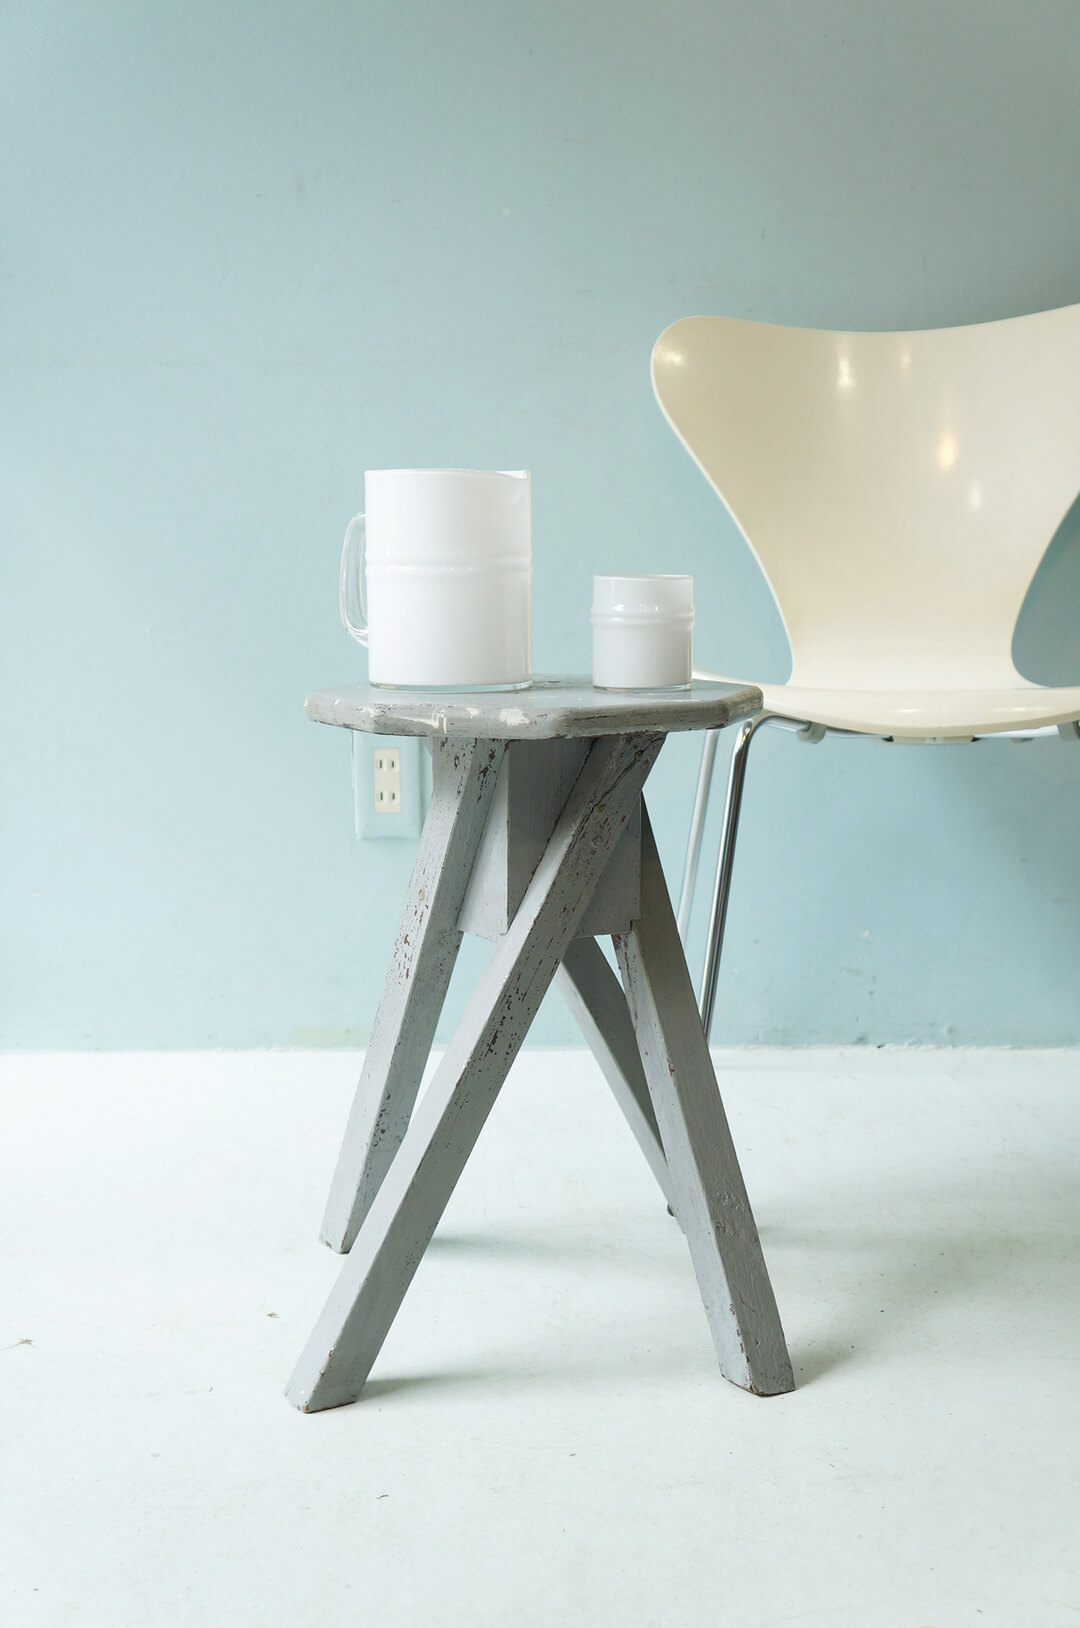 Vintage Octagon Atelier Stool Painted Gray/ヴィンテージ 八角形アトリエスツール 椅子 グレーペイント シャビーシック